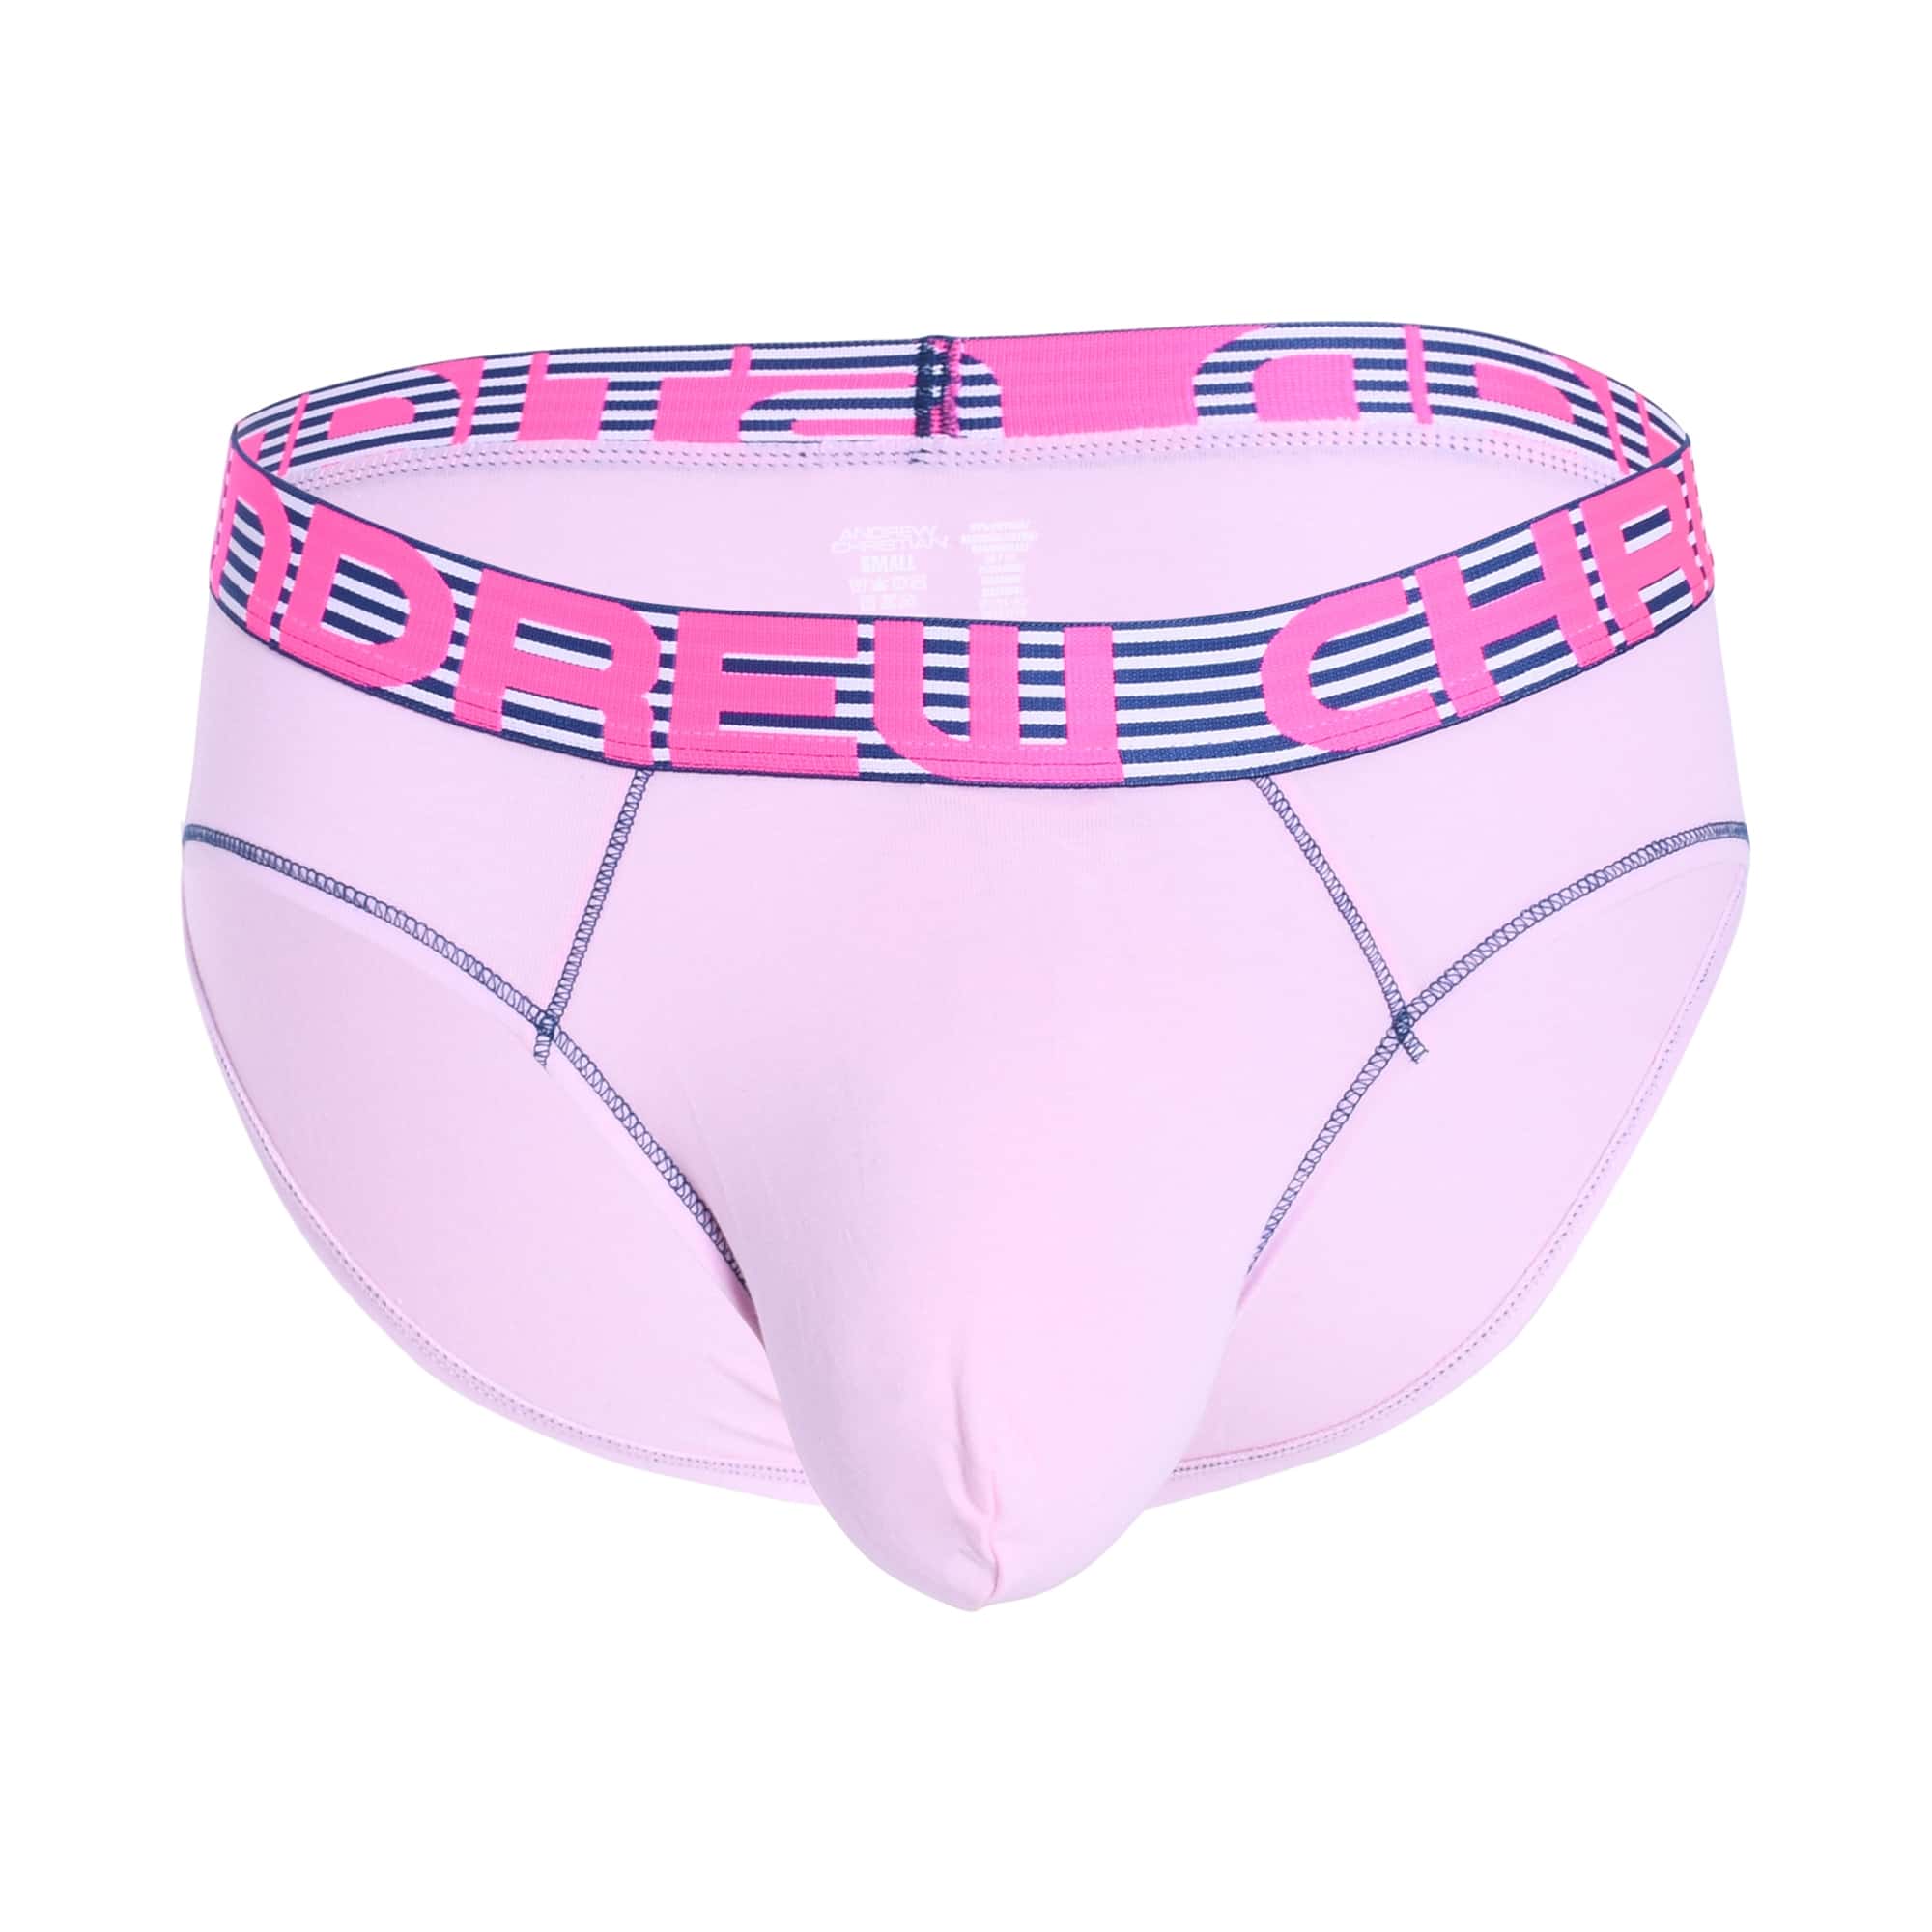 Andrew Christian Almost Naked Hang-Free Briefs - Pink